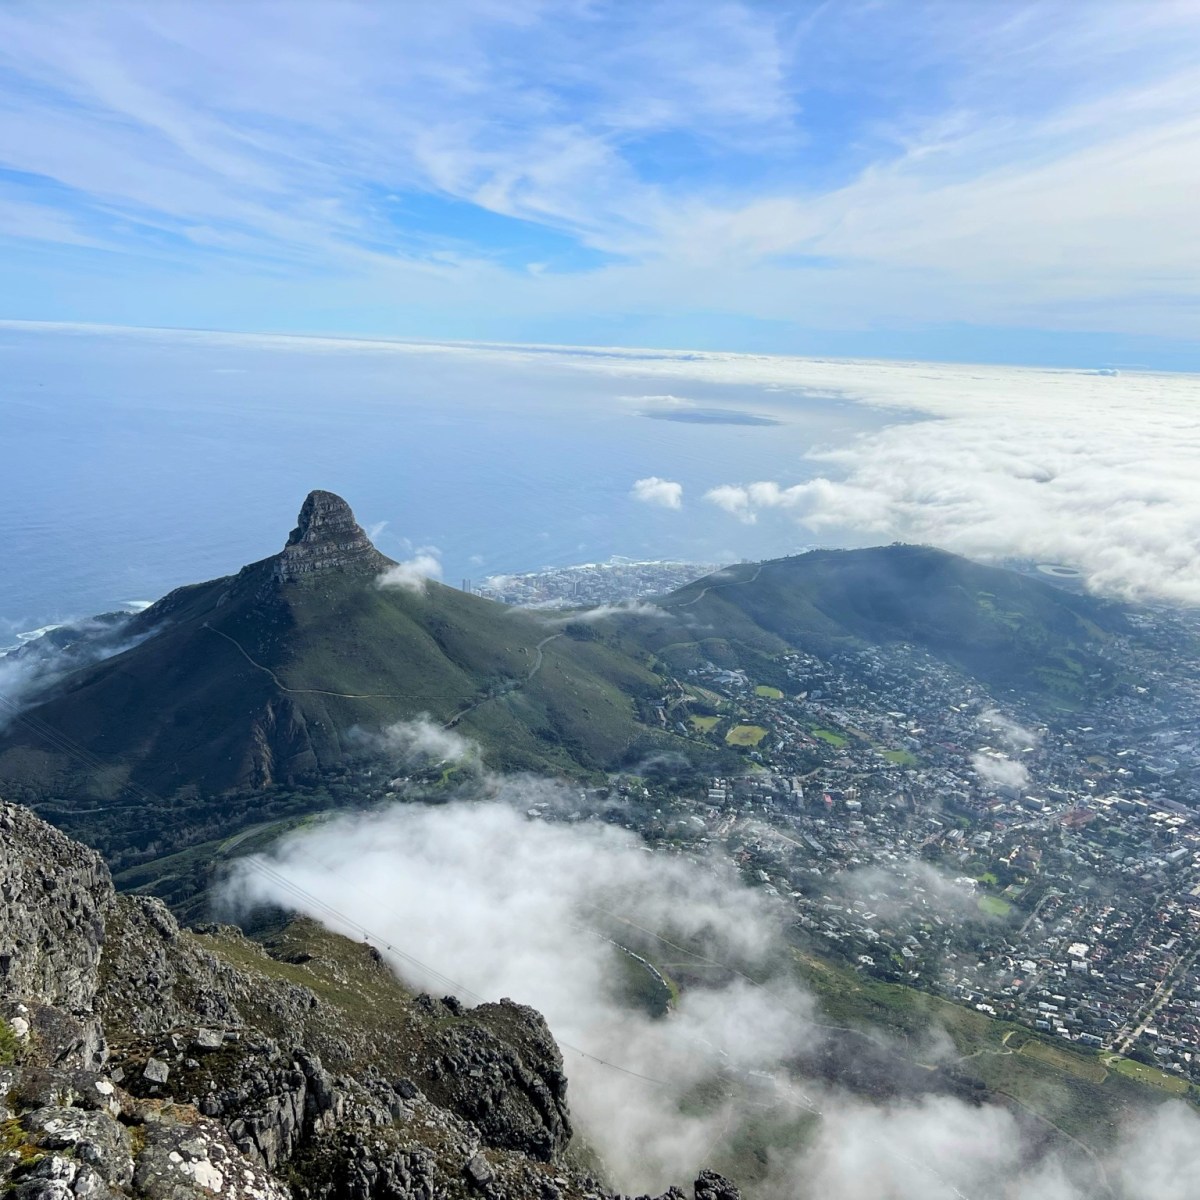 6 Days in Cape Town, South Africa